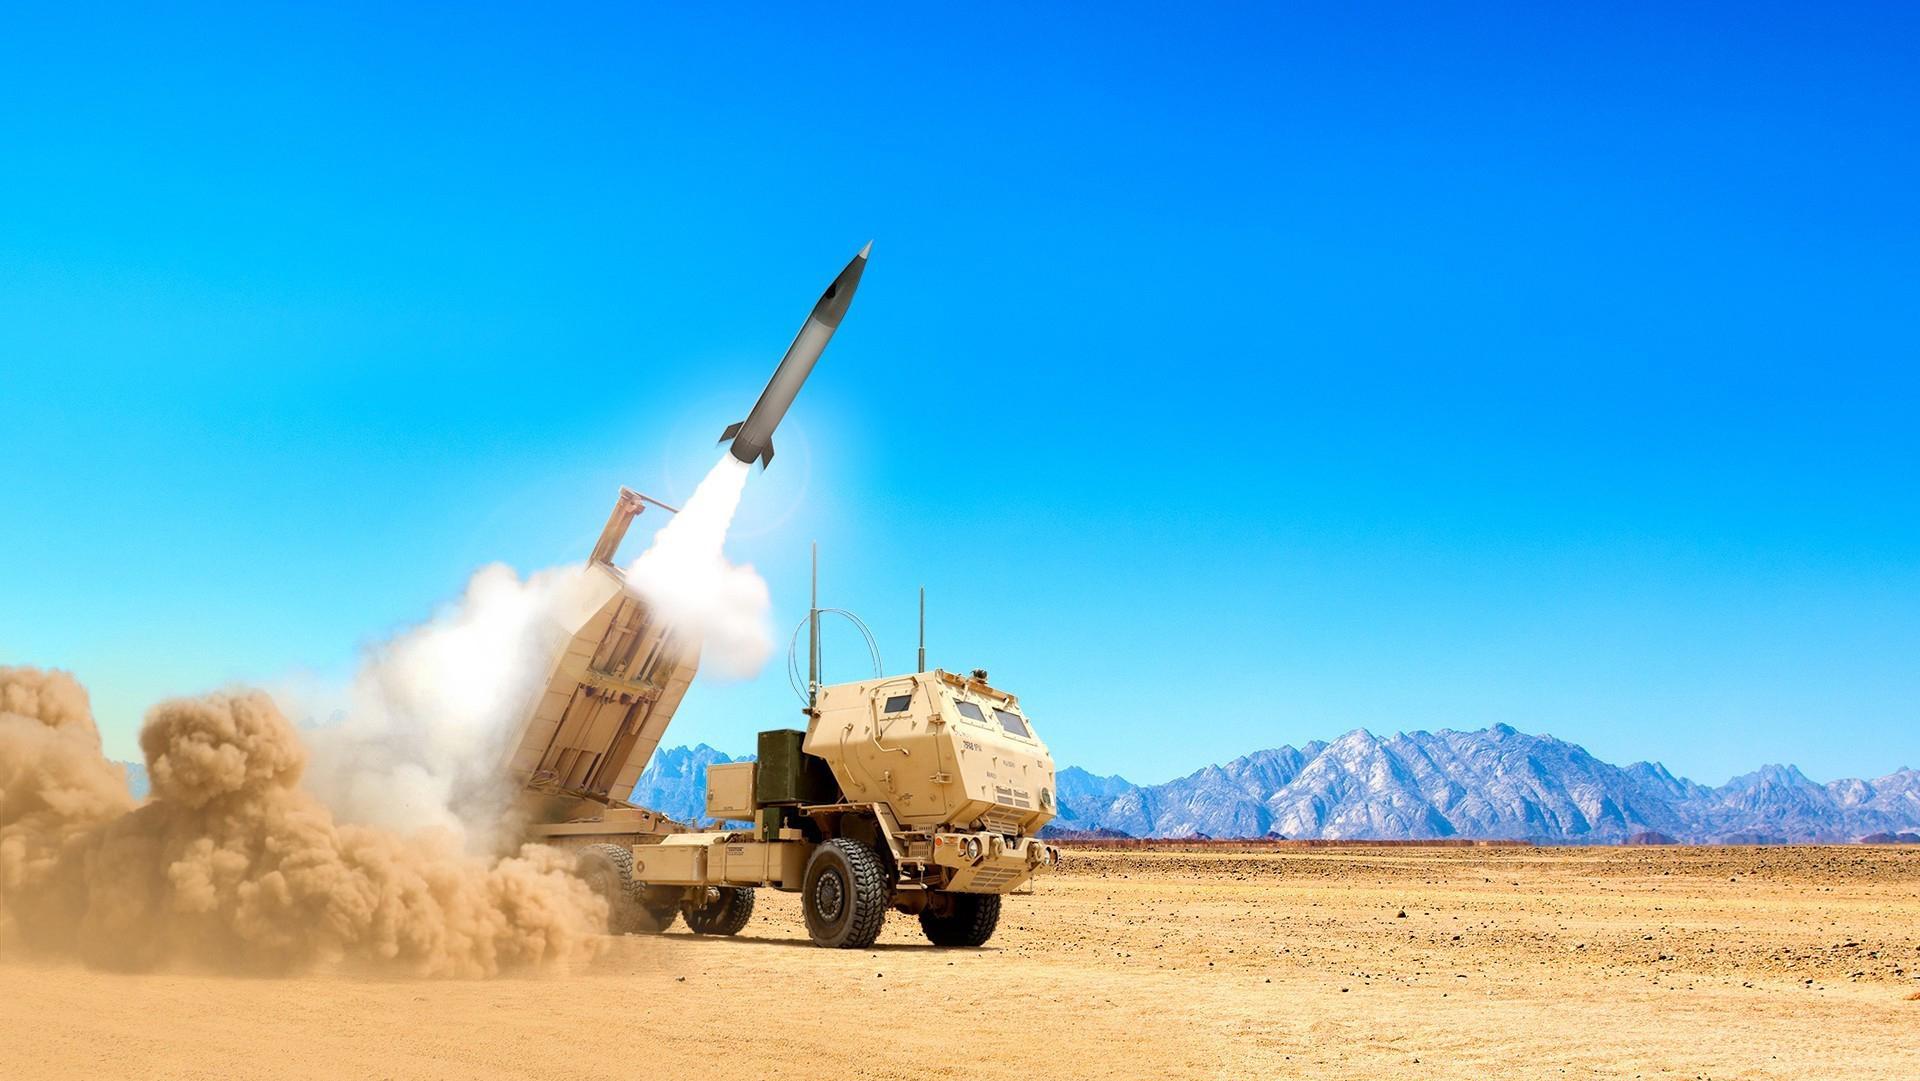 army tactical missile system